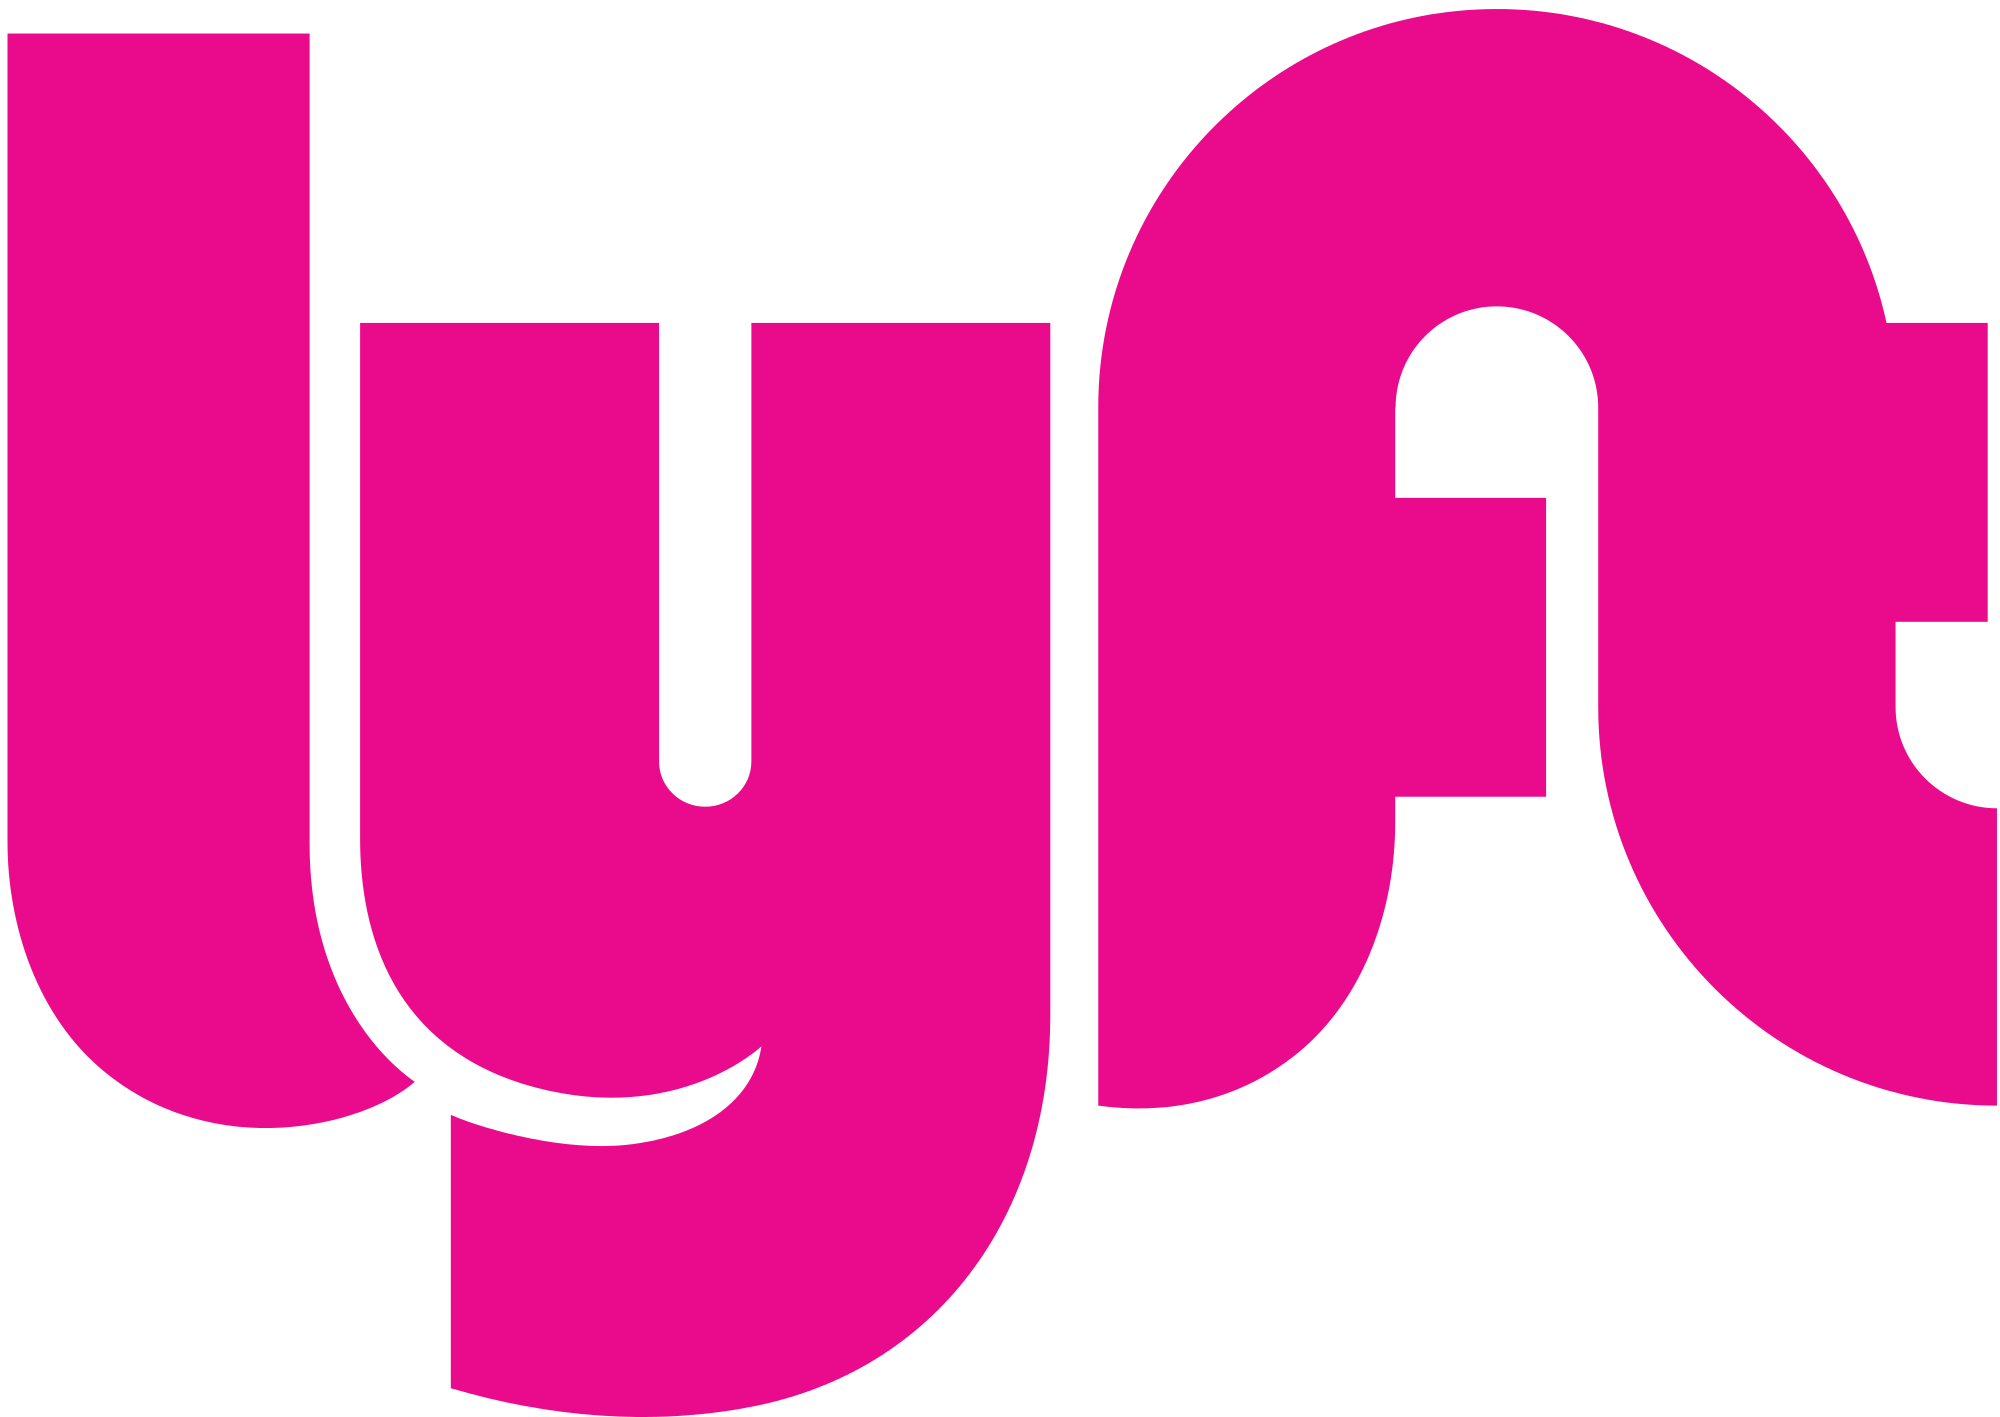 Lyft Coupons & Promo Codes